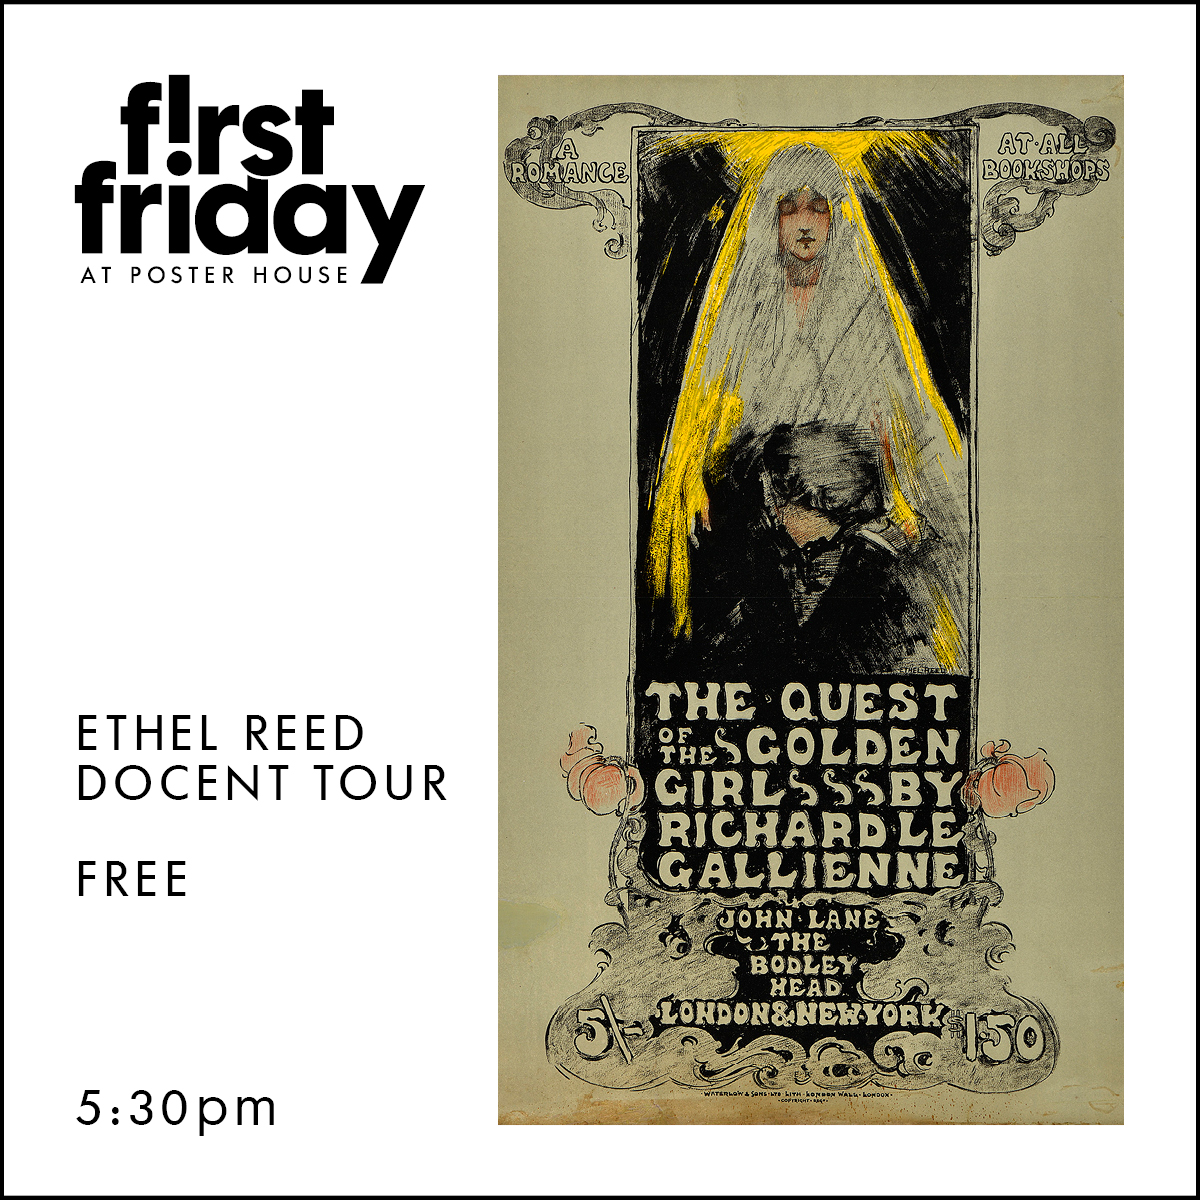 First Friday promotion featuring a lithographic poster of an angelic woman holding a man's head in her lap. Text reads First Friday at Poster House Ethel Reed docent tour free 5:30pm.